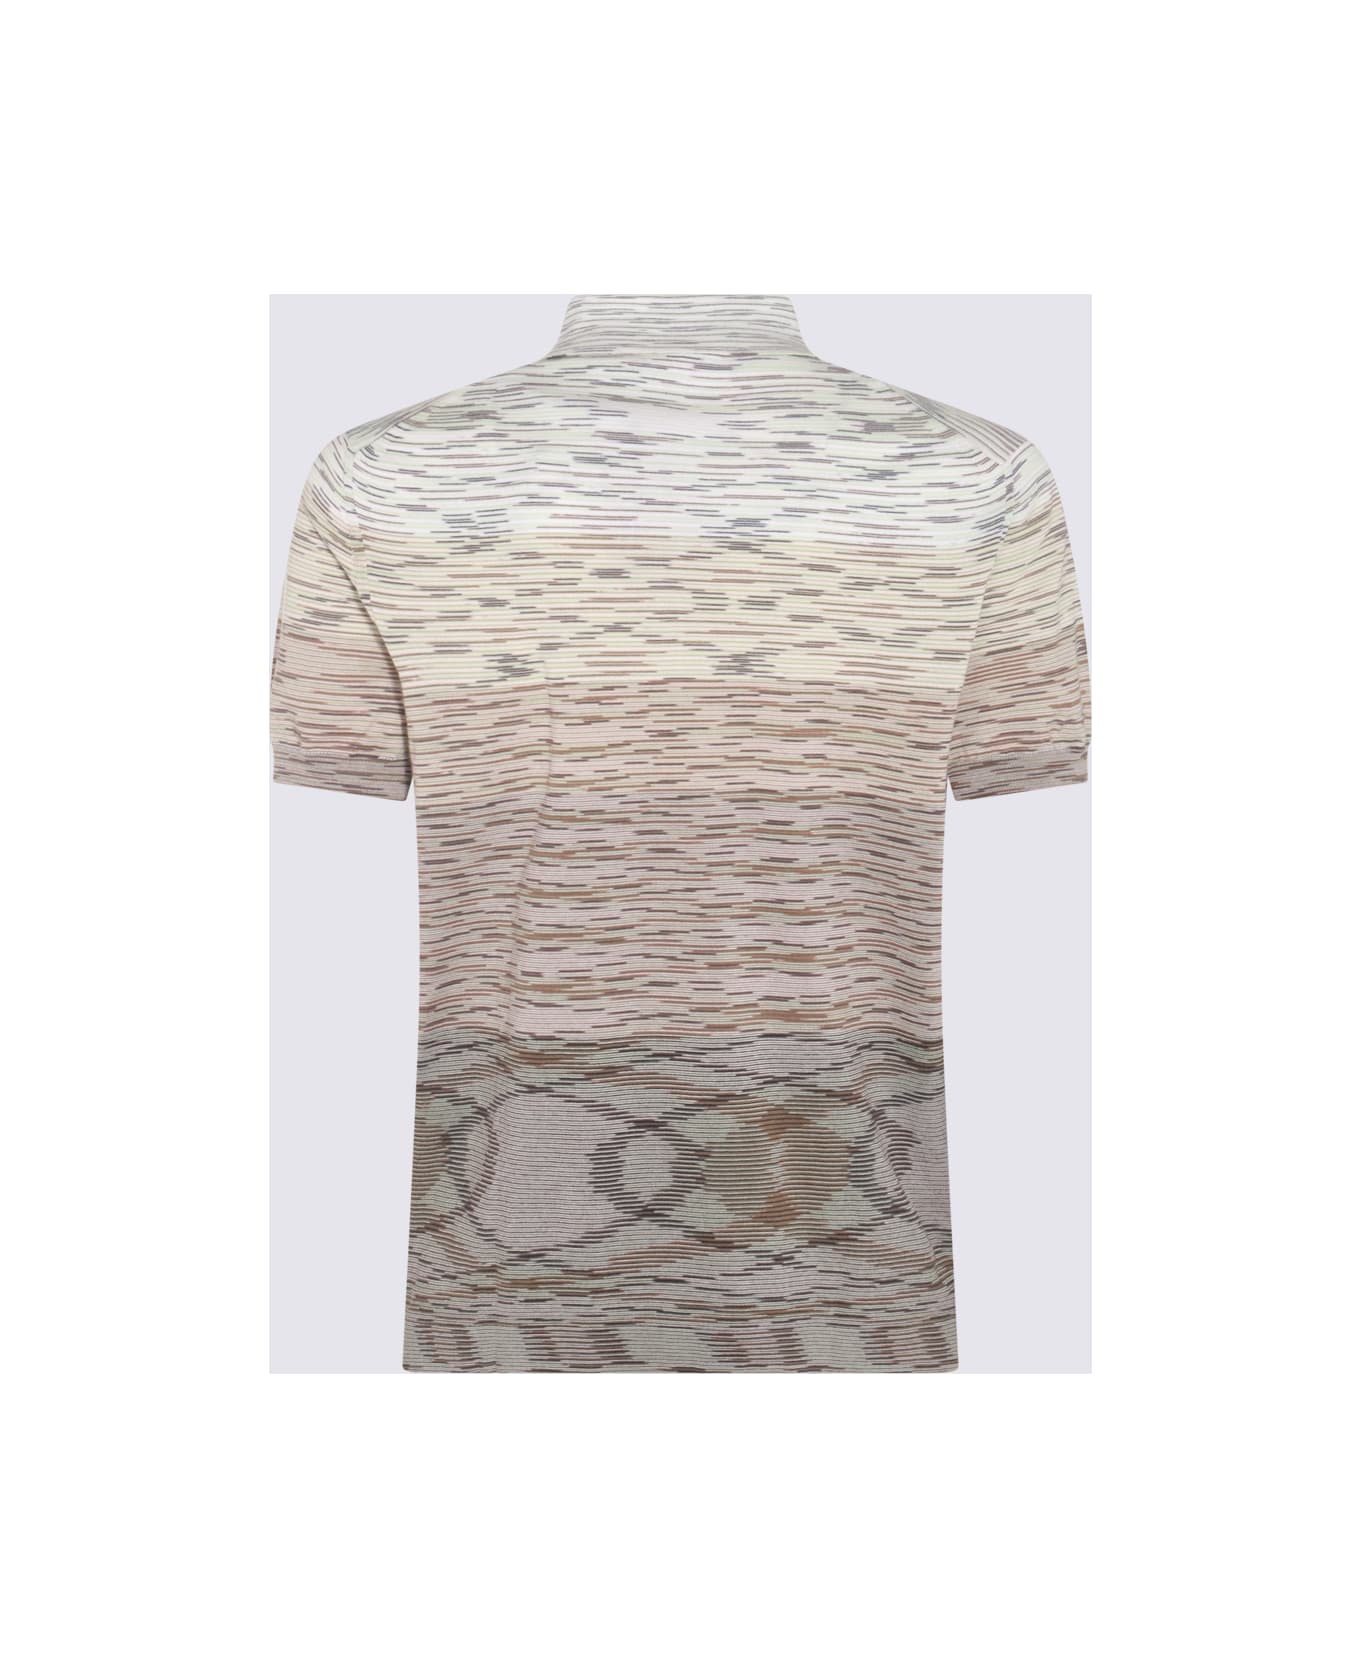 Missoni Beige Multicolour Cotton Polo Shirt - DEGRADED SPACE DYE WITH BEIGE